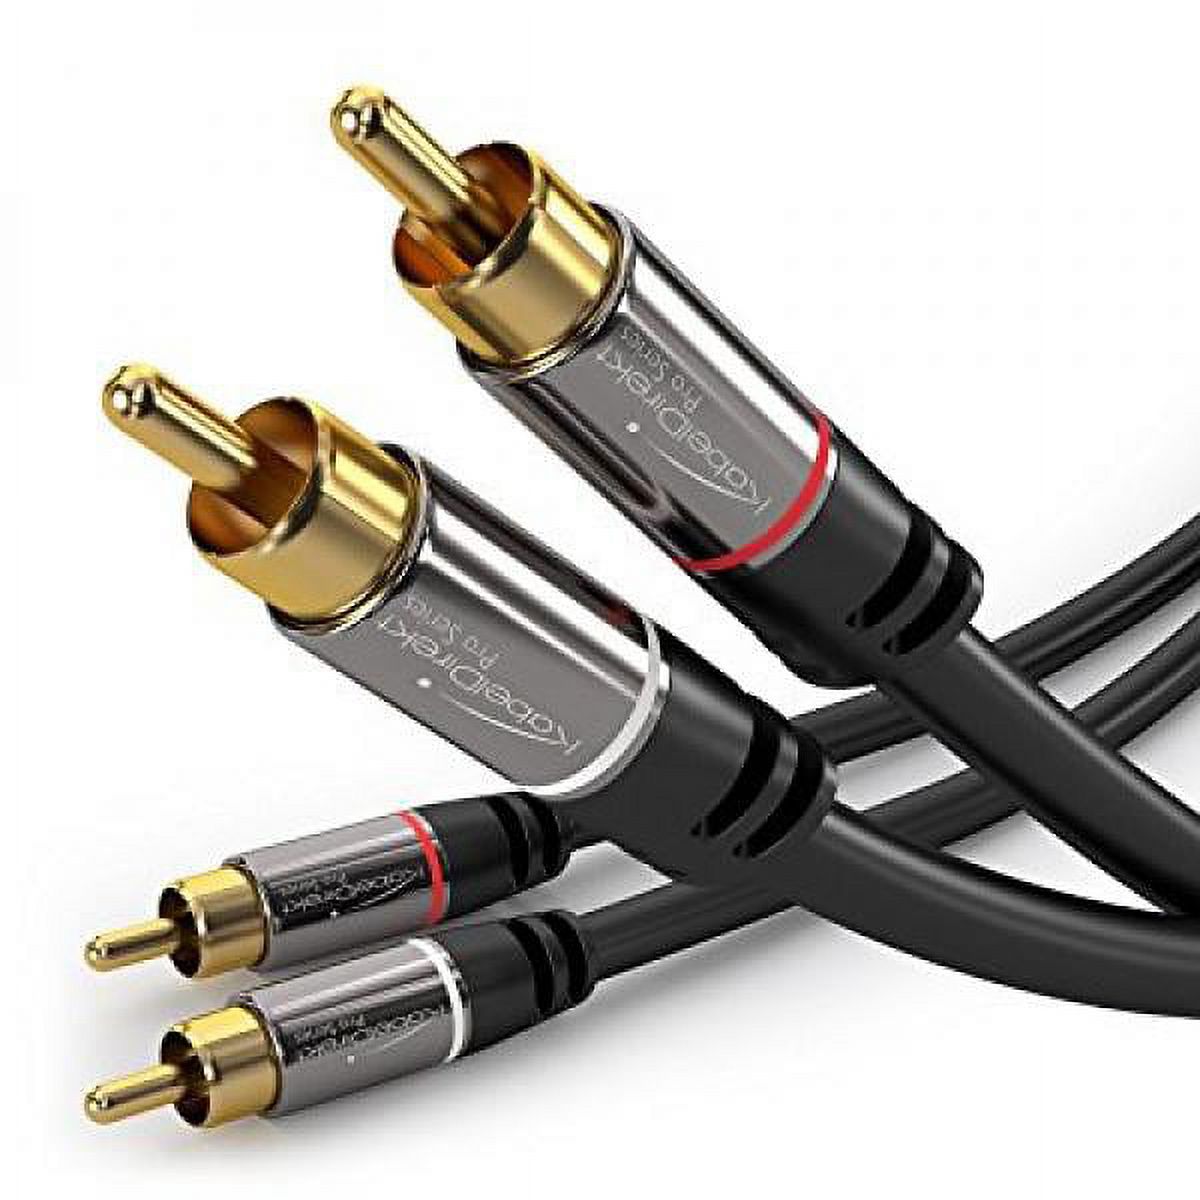 kabeldirekt rca stereo cable/cord (10 ft/feet short, dual 2 x rca male to 2 x rca male audio cable, digital & analogue, double-shielded, pro series) supports (amplifiers, av receivers, hi-fi) - image 1 of 6